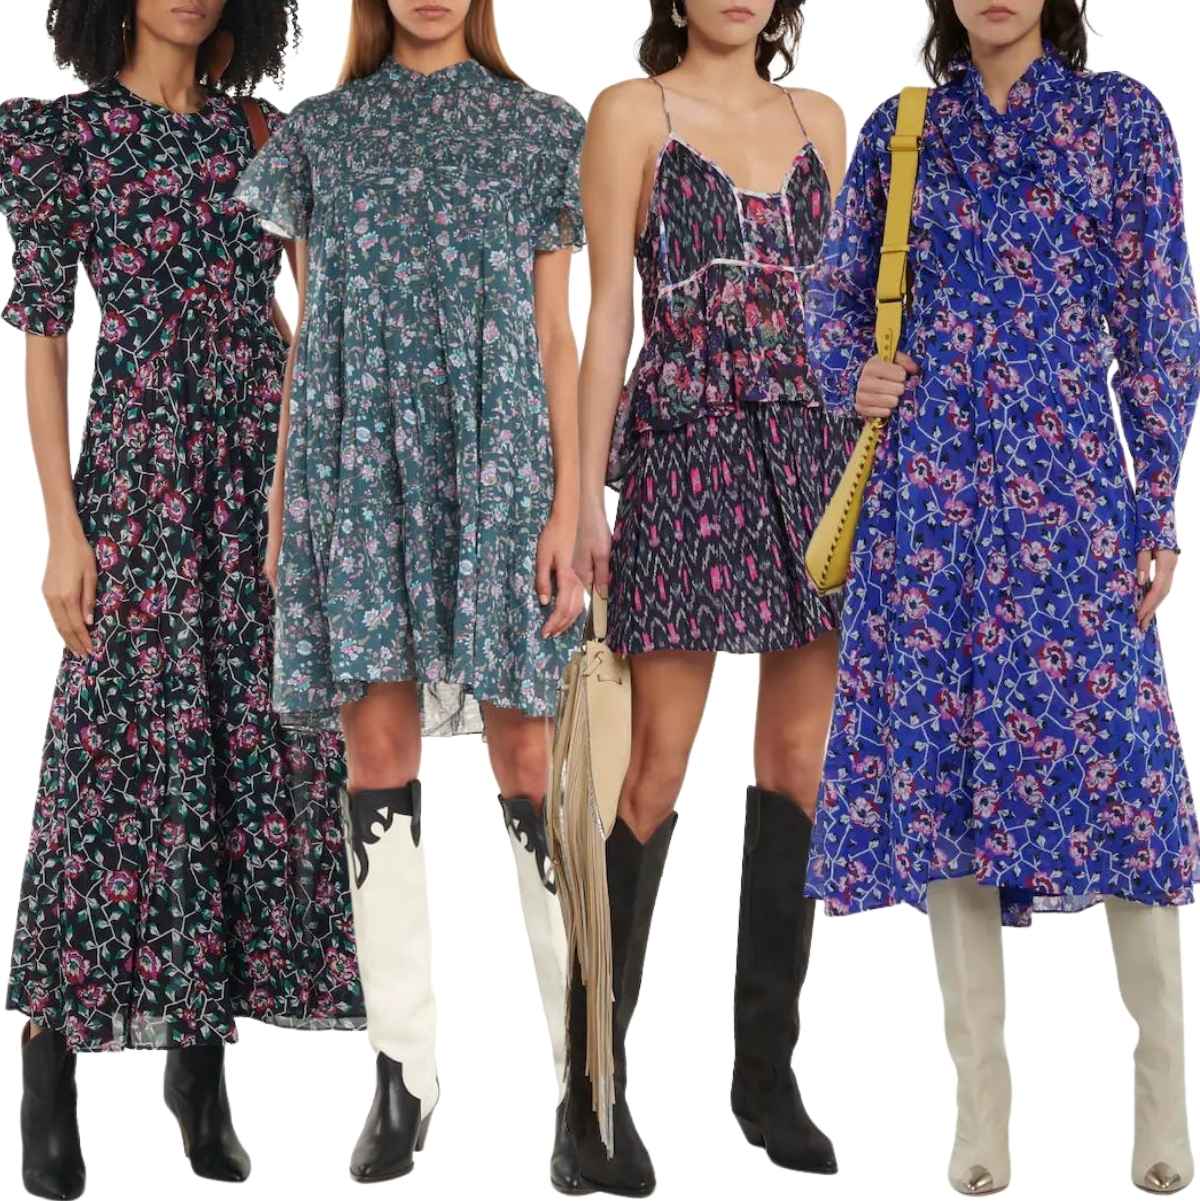 4 women wearing floral dresses with cowboy boots.